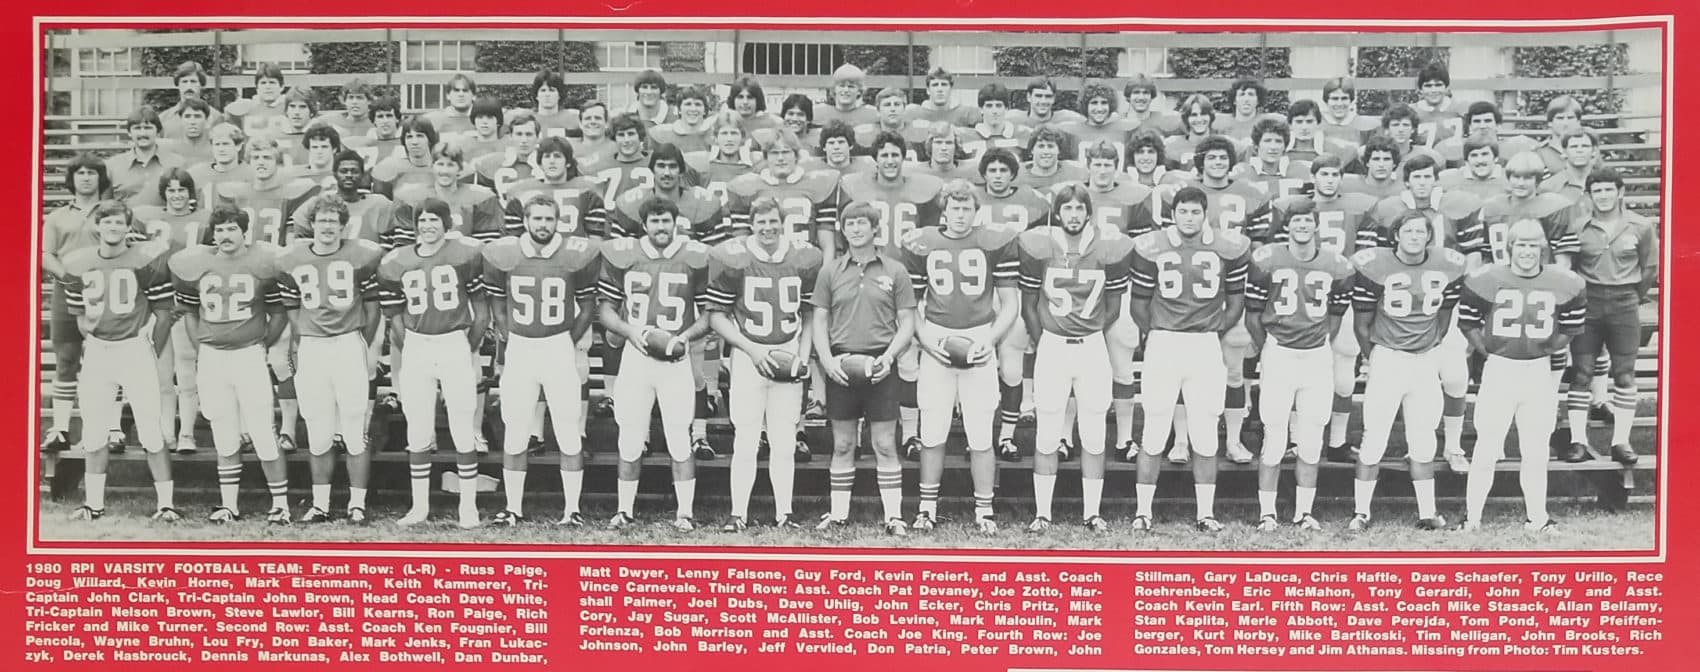 1980 ohio state football roster